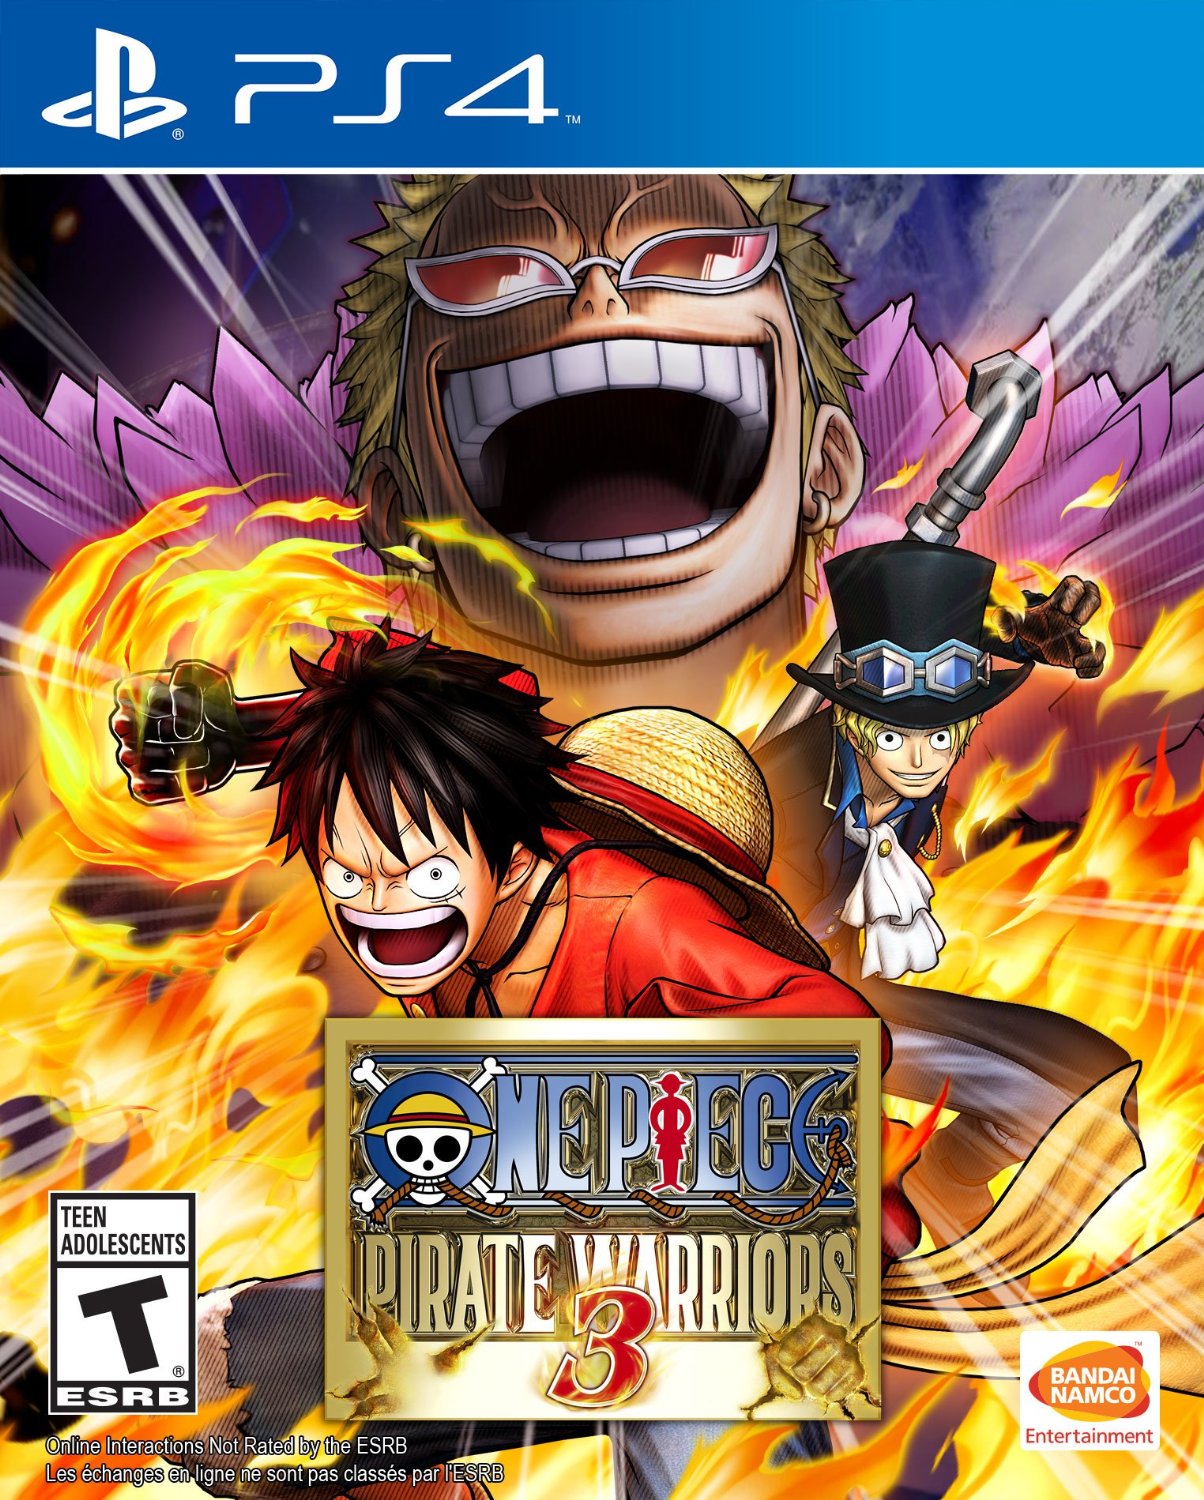 one piece pirate warriors 2 pc company name